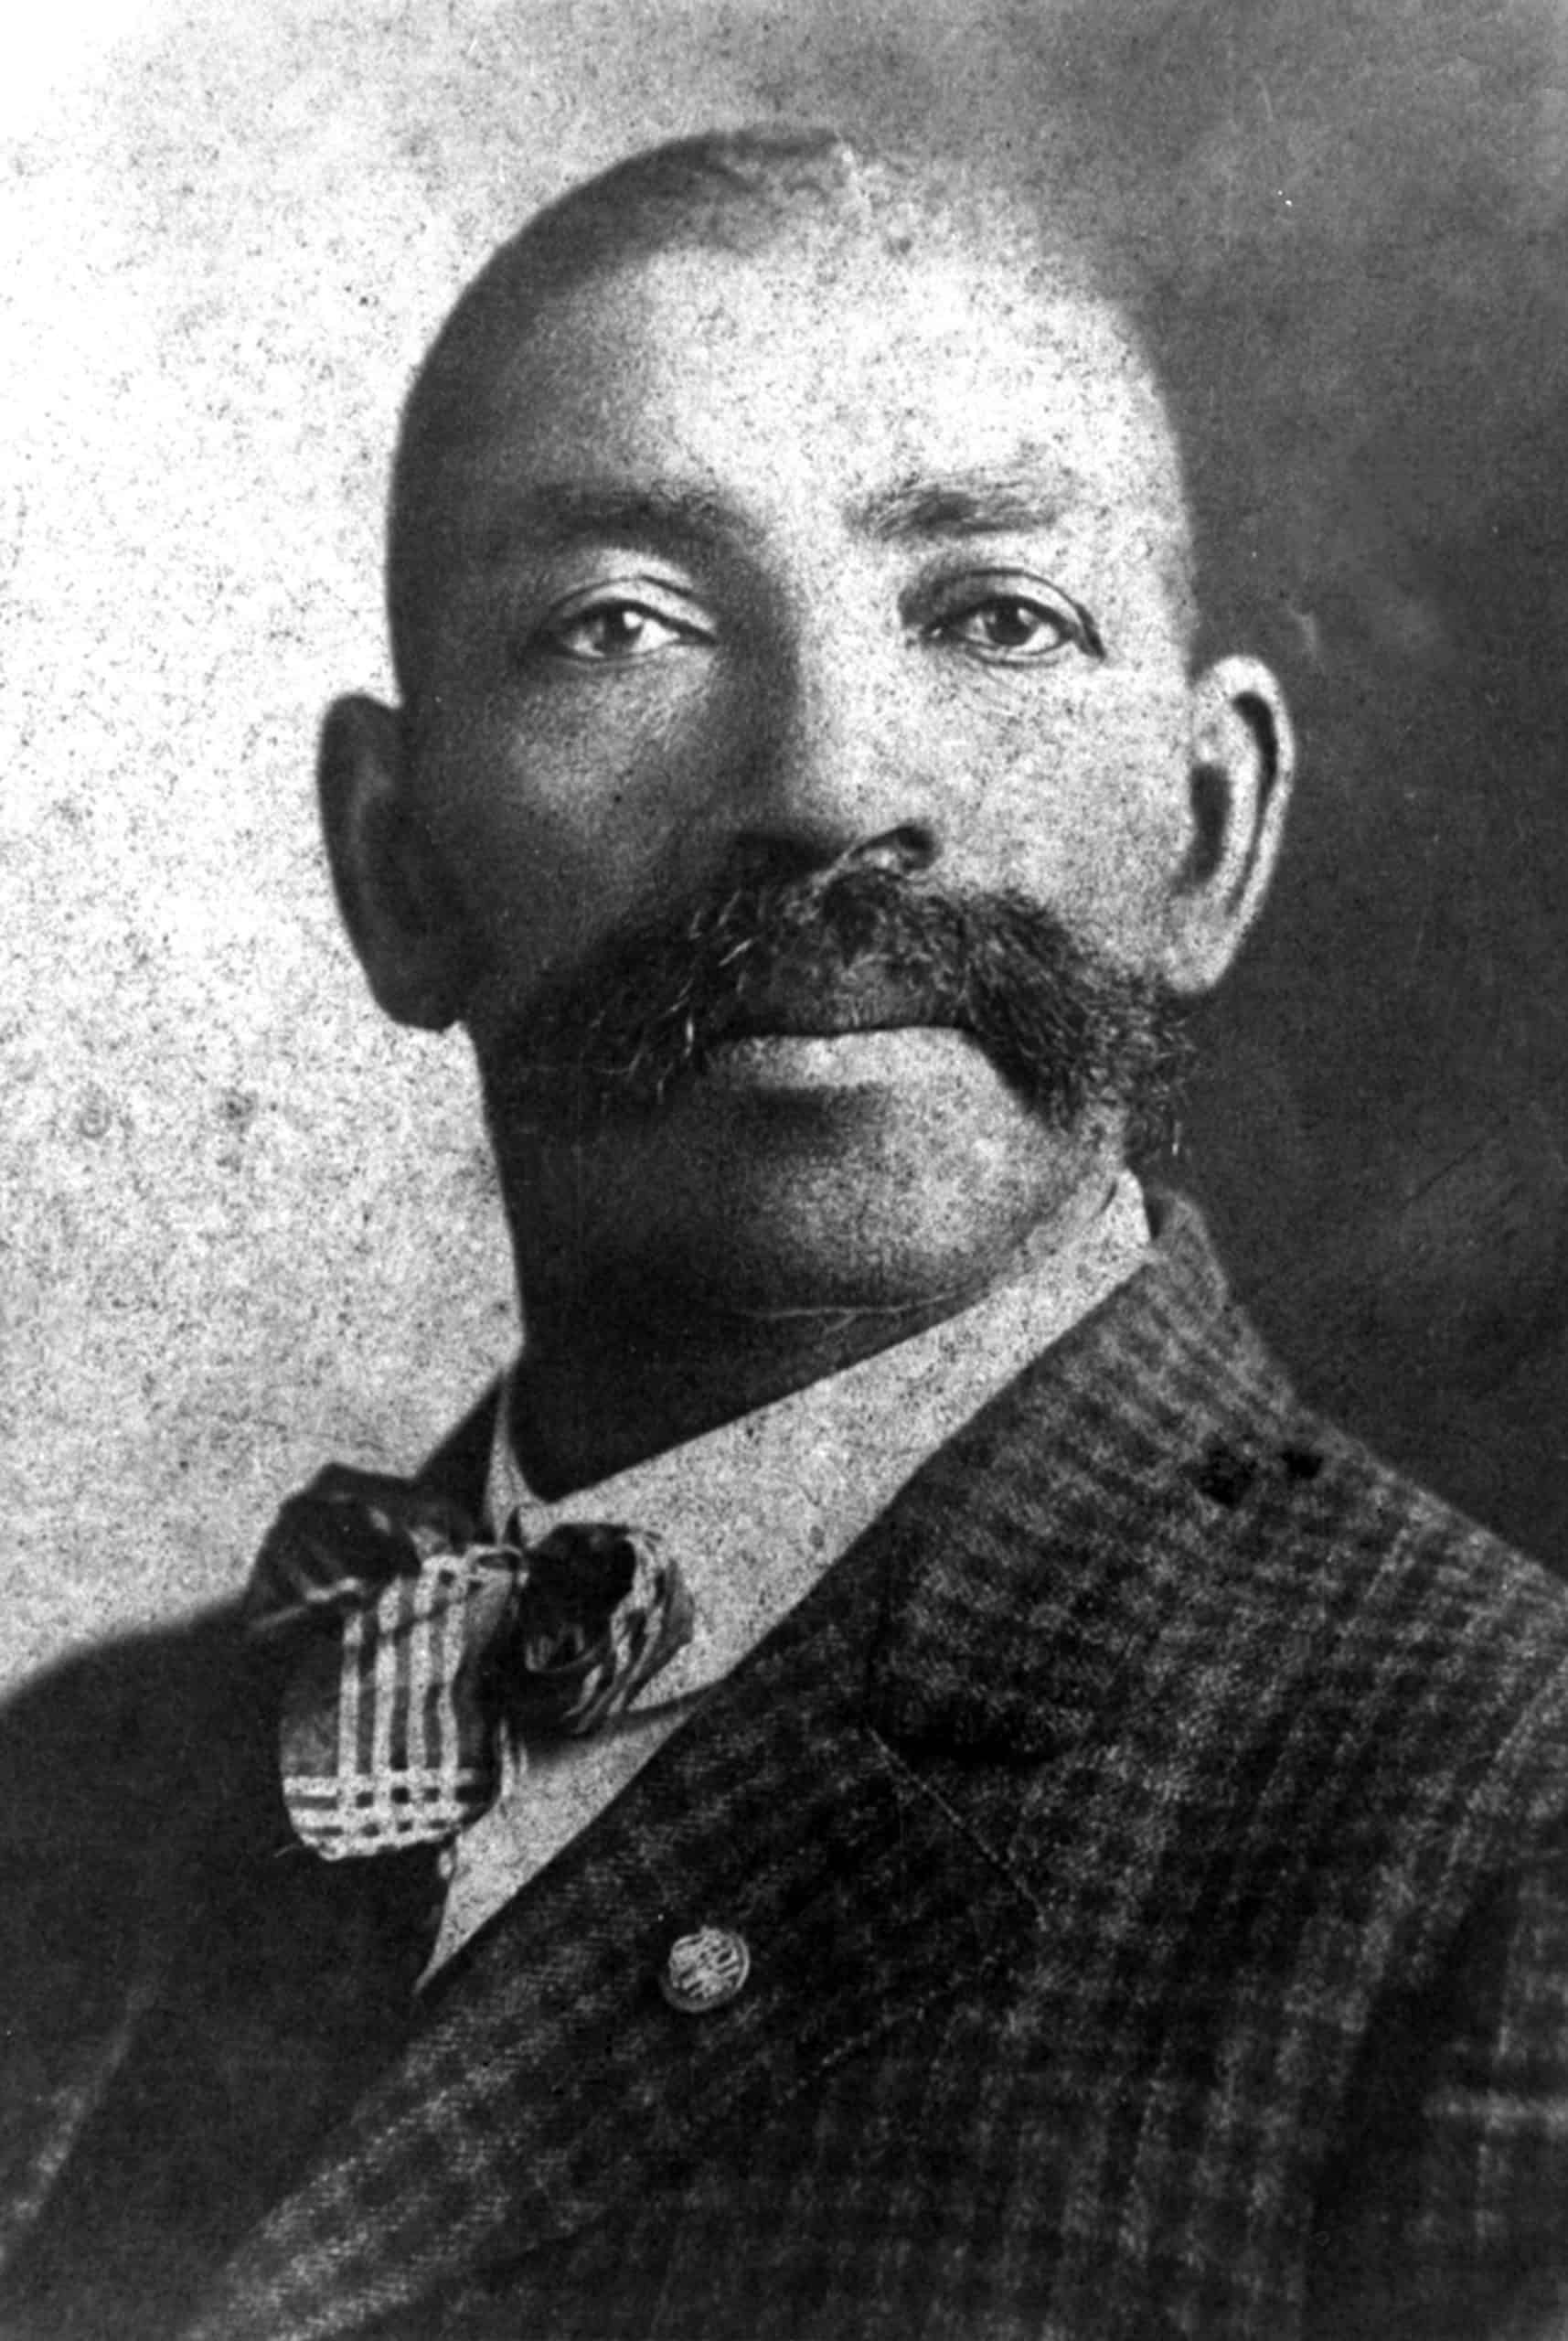 Bass Reeves – 1838 to 1910